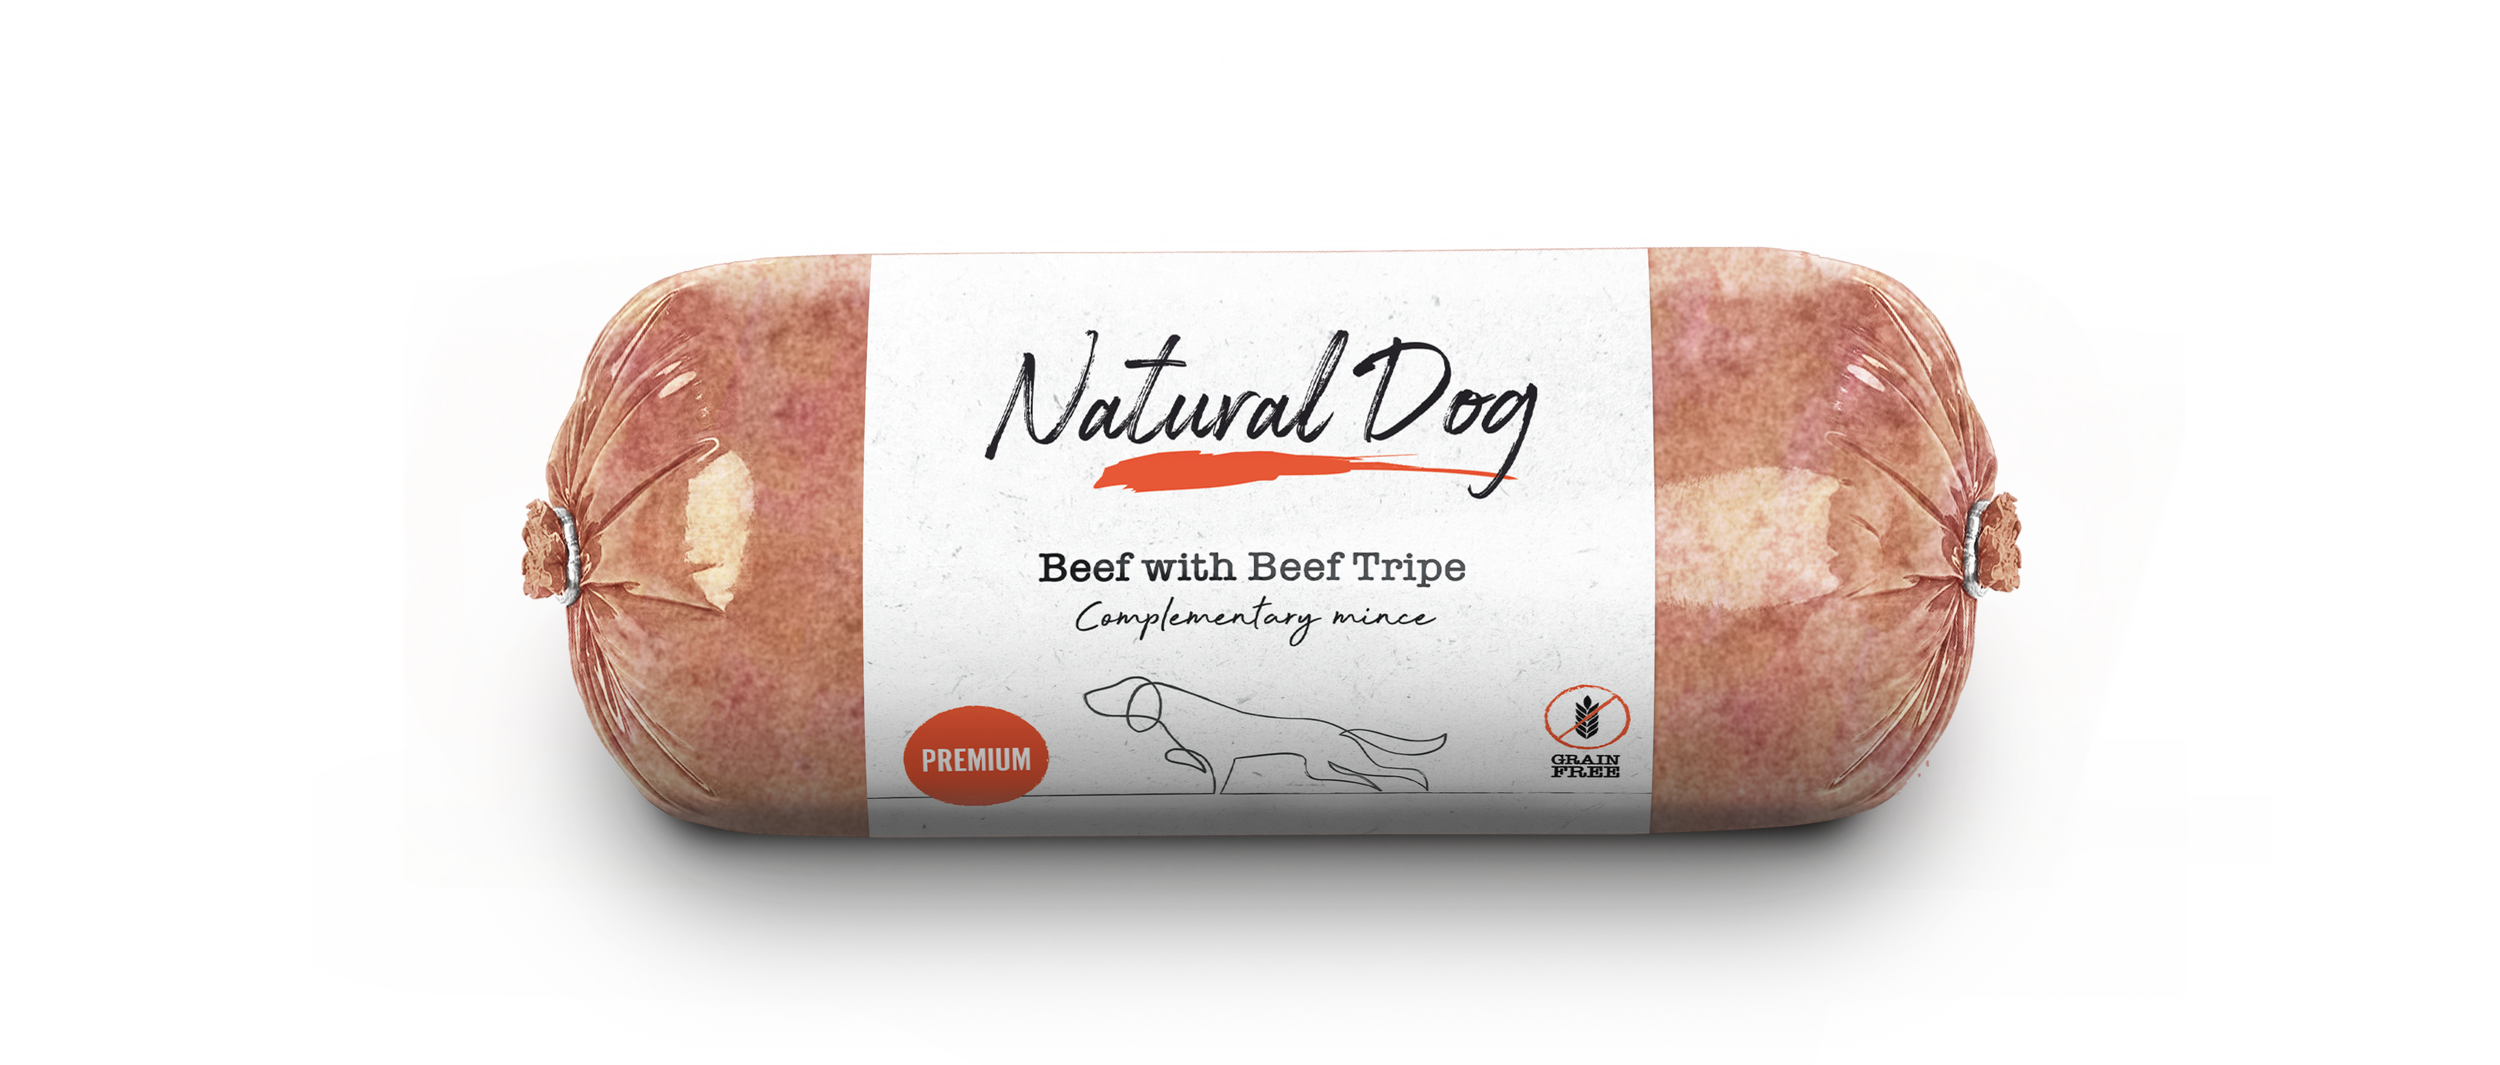 Natural Dog_Top down chub roll_Beef with Beef Tripe PREMIUM.png